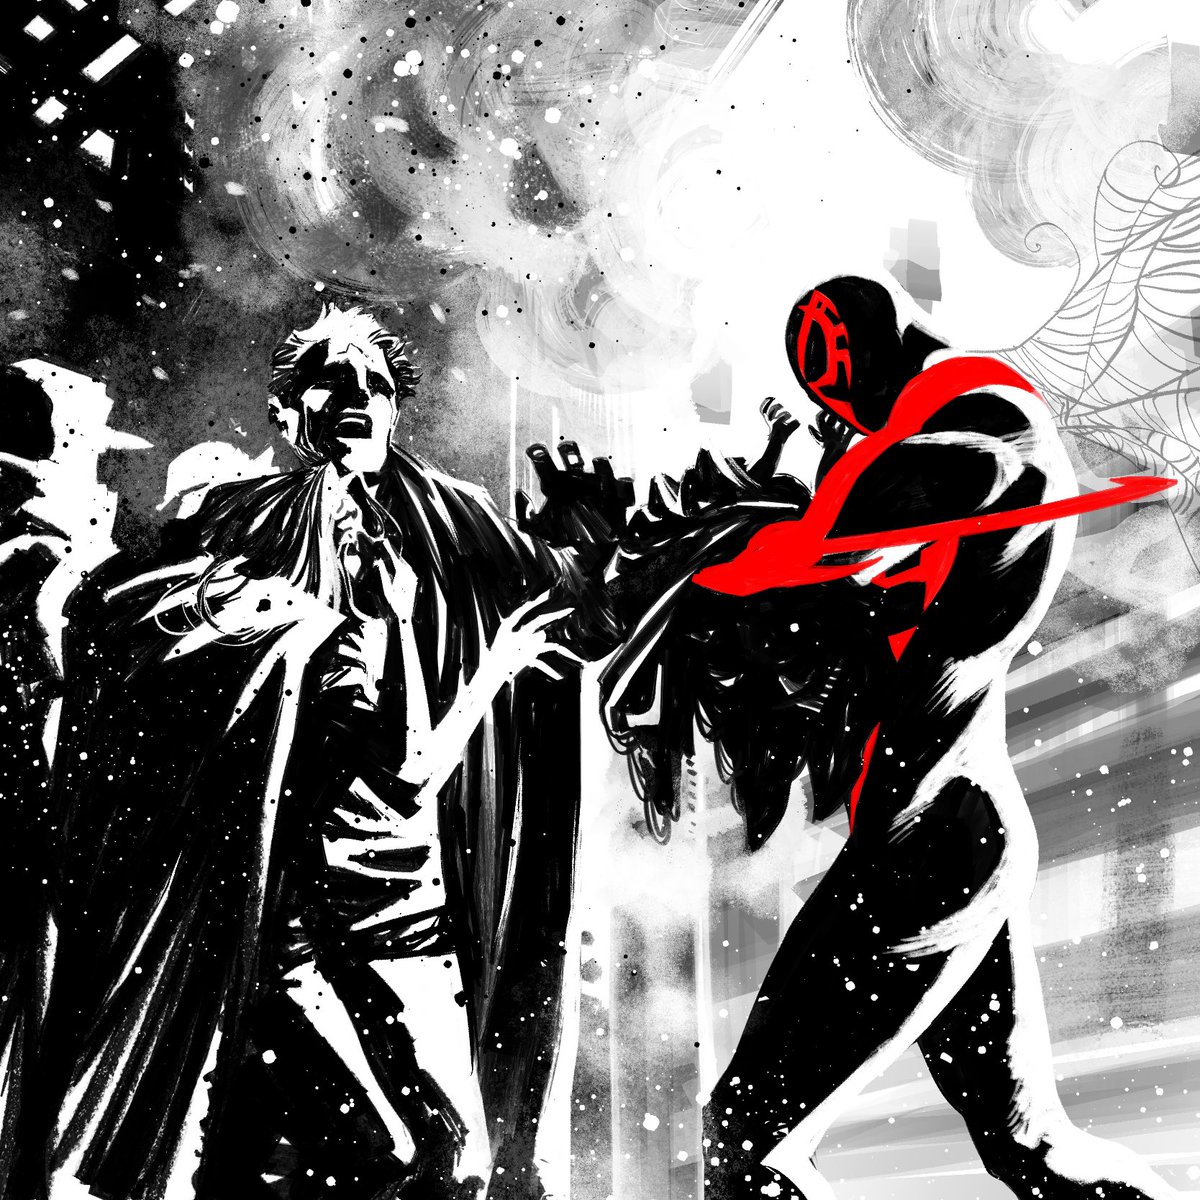 Been busy with deadlines, so here’s an alternate version of the “Spider-Man saving the baby” composition I had for the Black white and red series of compositions. hope you guys enjoy a look behind the scenes ! #miguelohara #spiderman2099 #blackwhiteandred #marvel #comics #daily